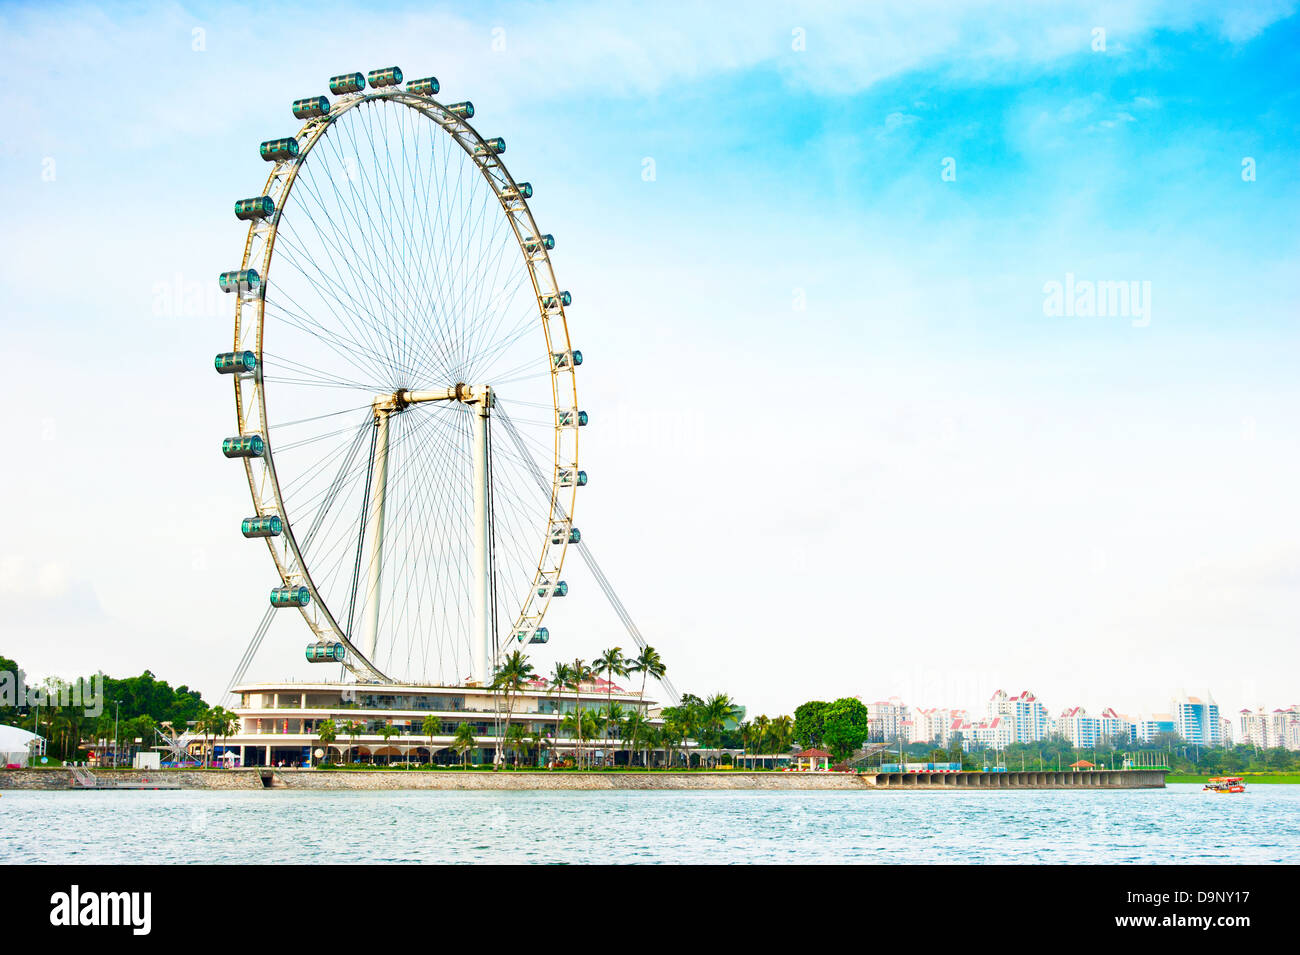 Singapore Flyer - the Largest Ferris Wheel in the World. Stock Photo